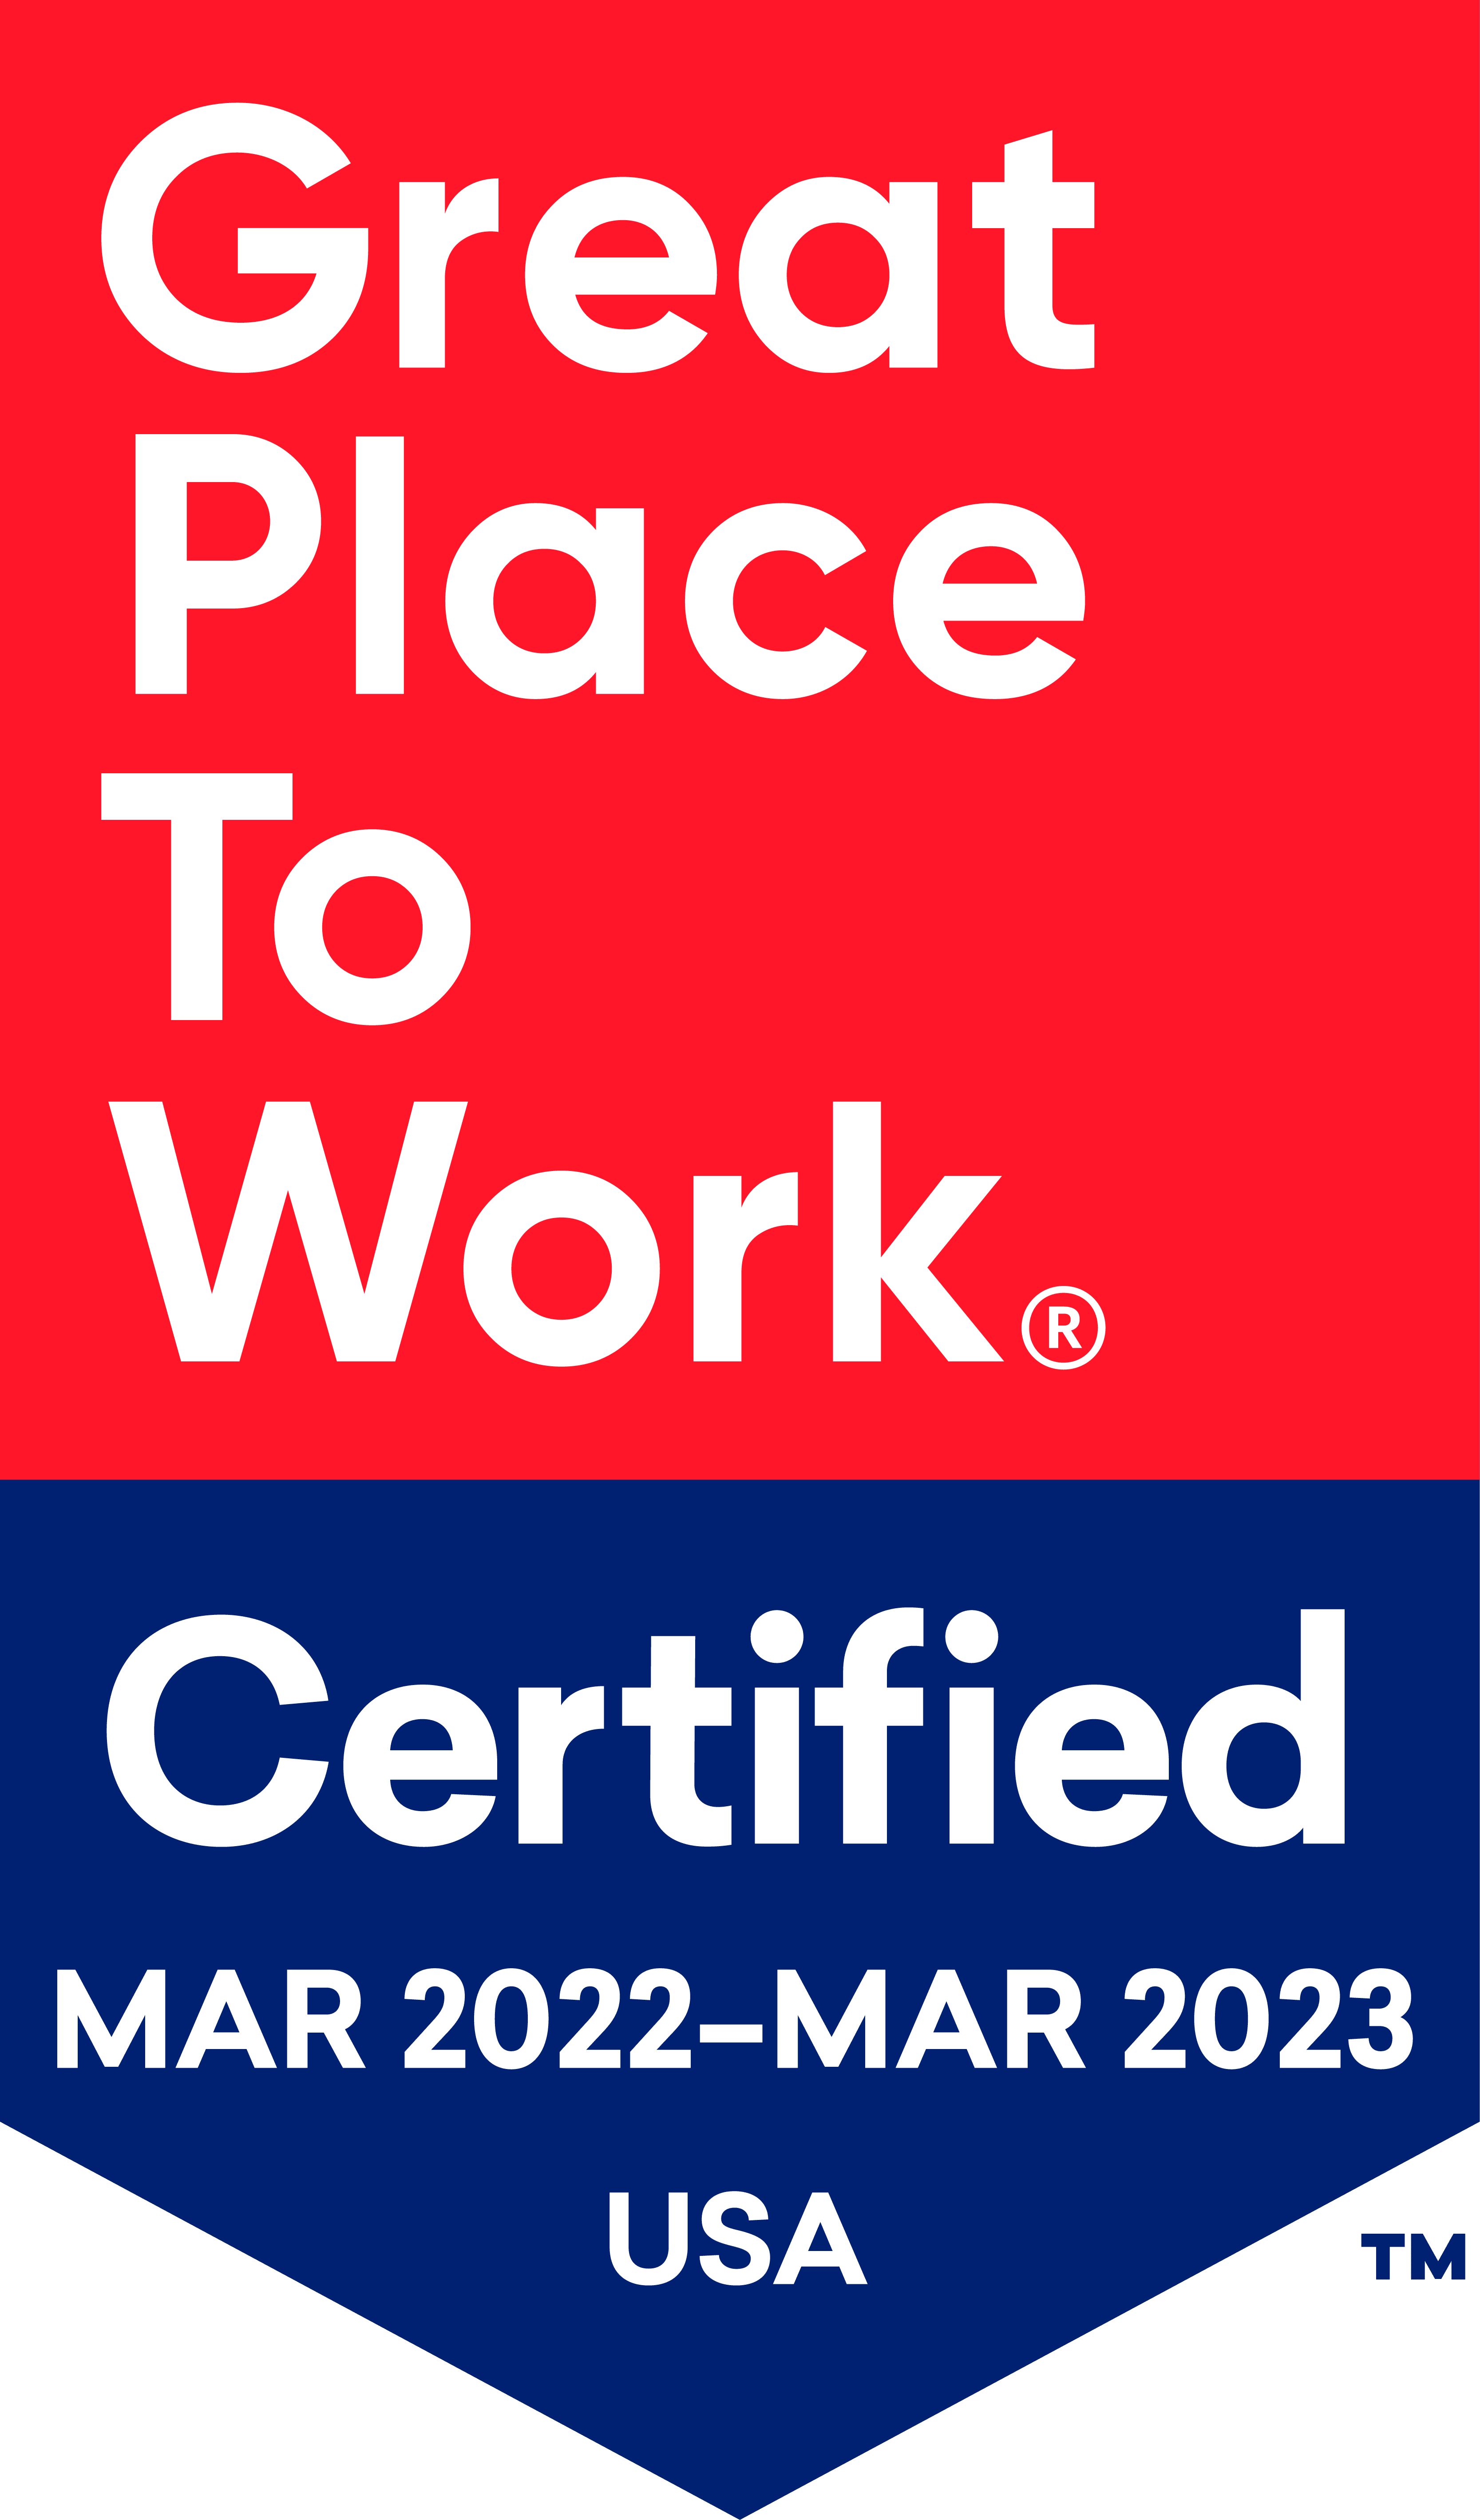 Great places to work badge for Keystone Place at Wooster Heights